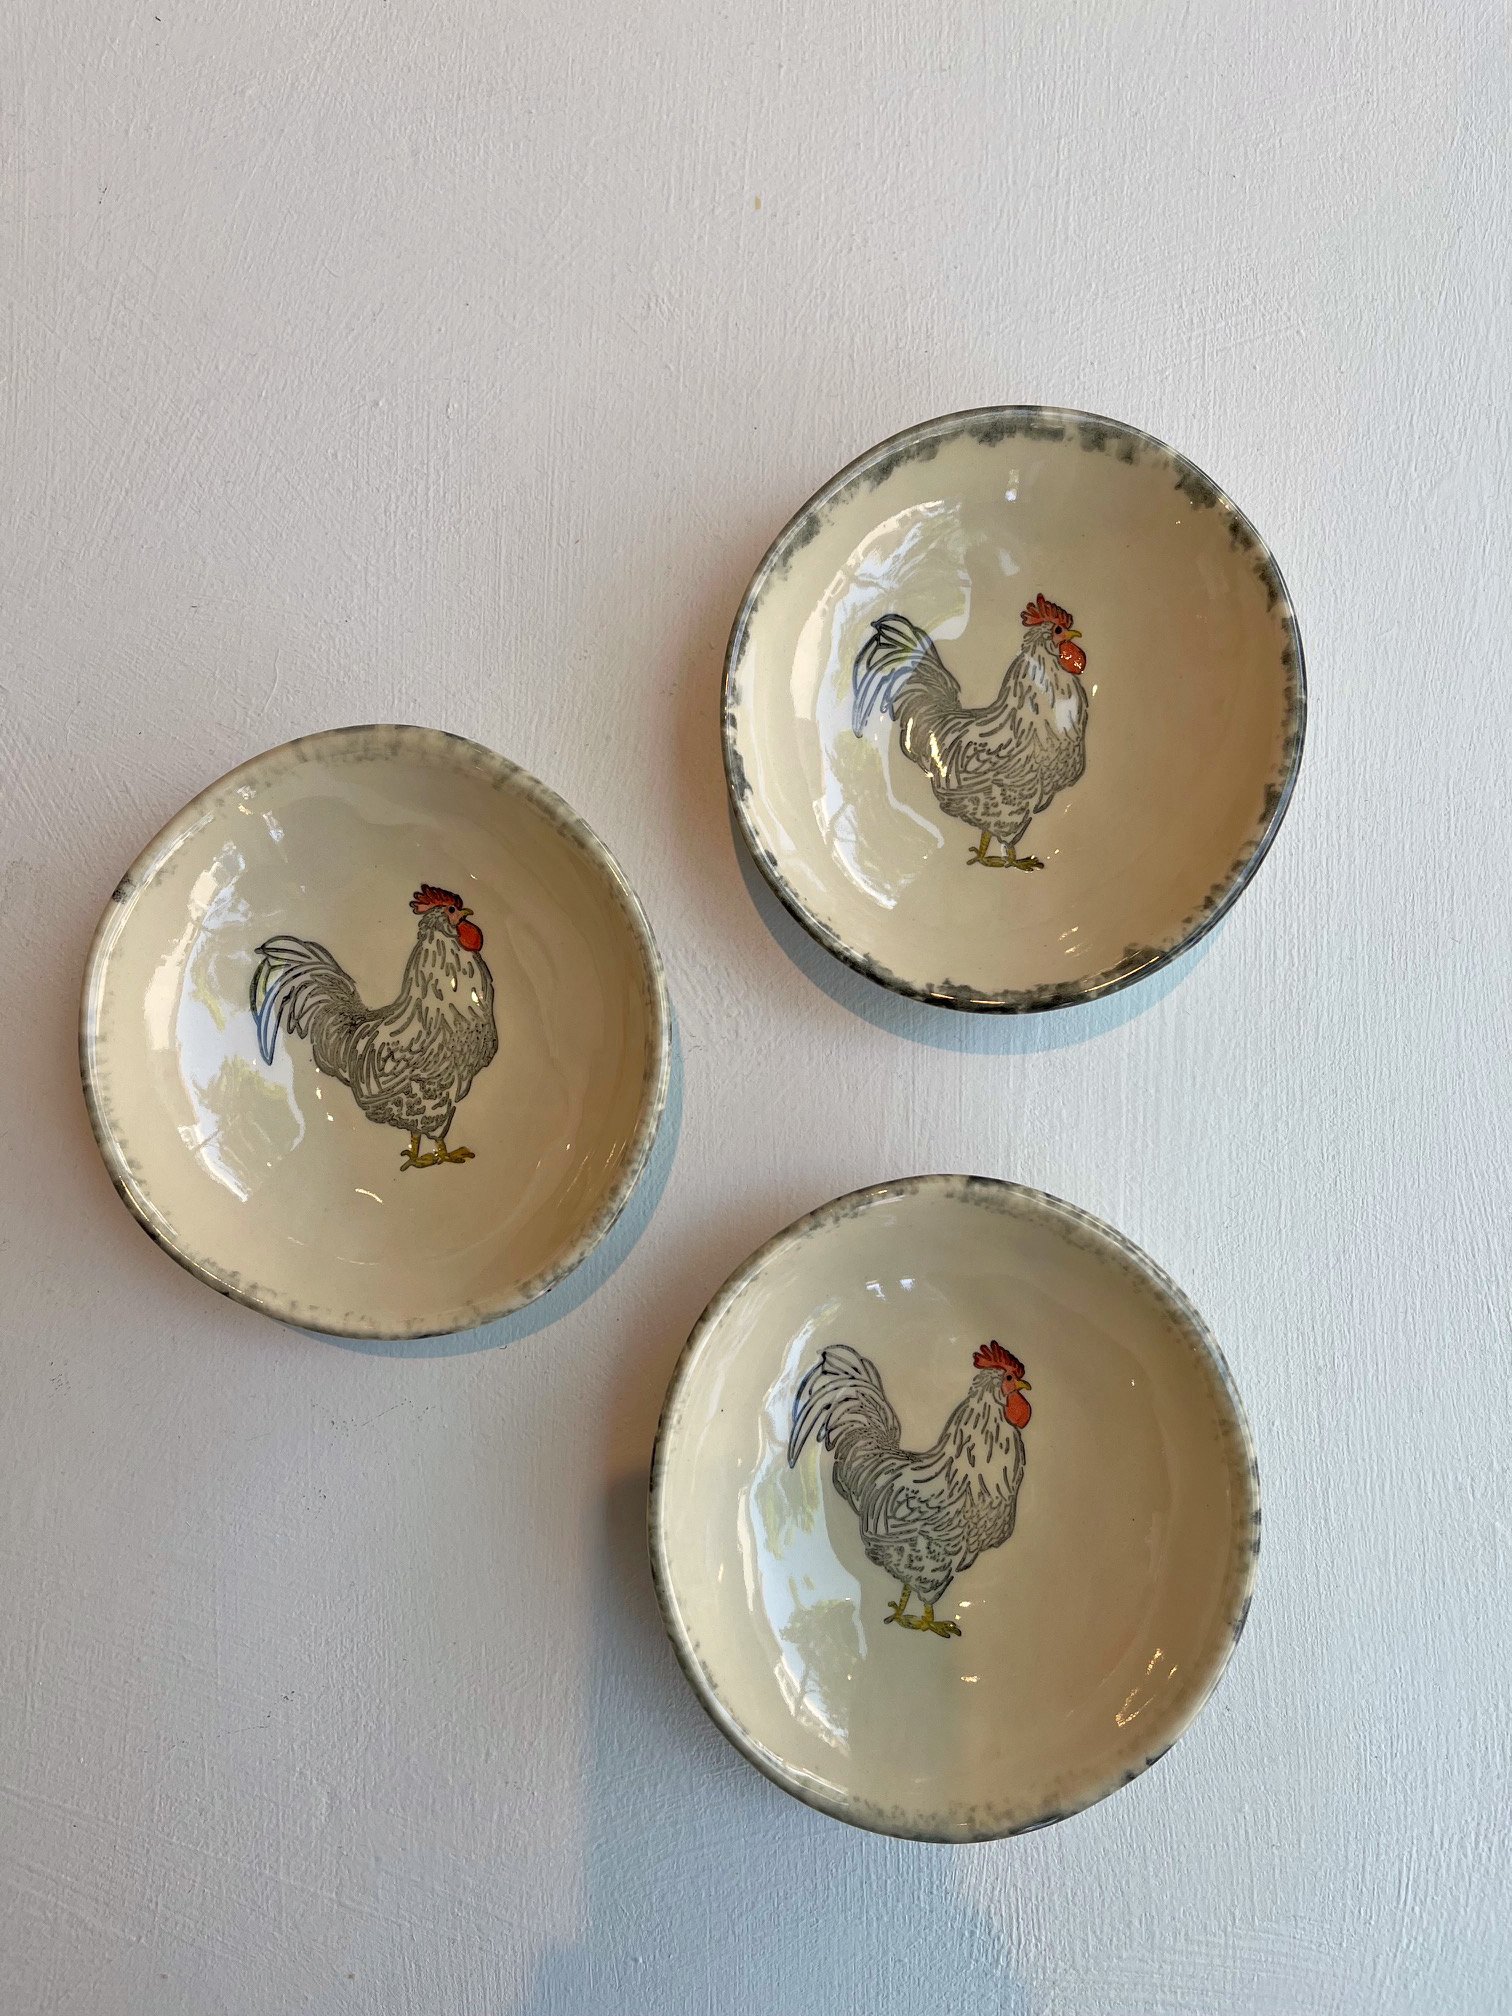 Rooster Bowls by Lorna Newlin